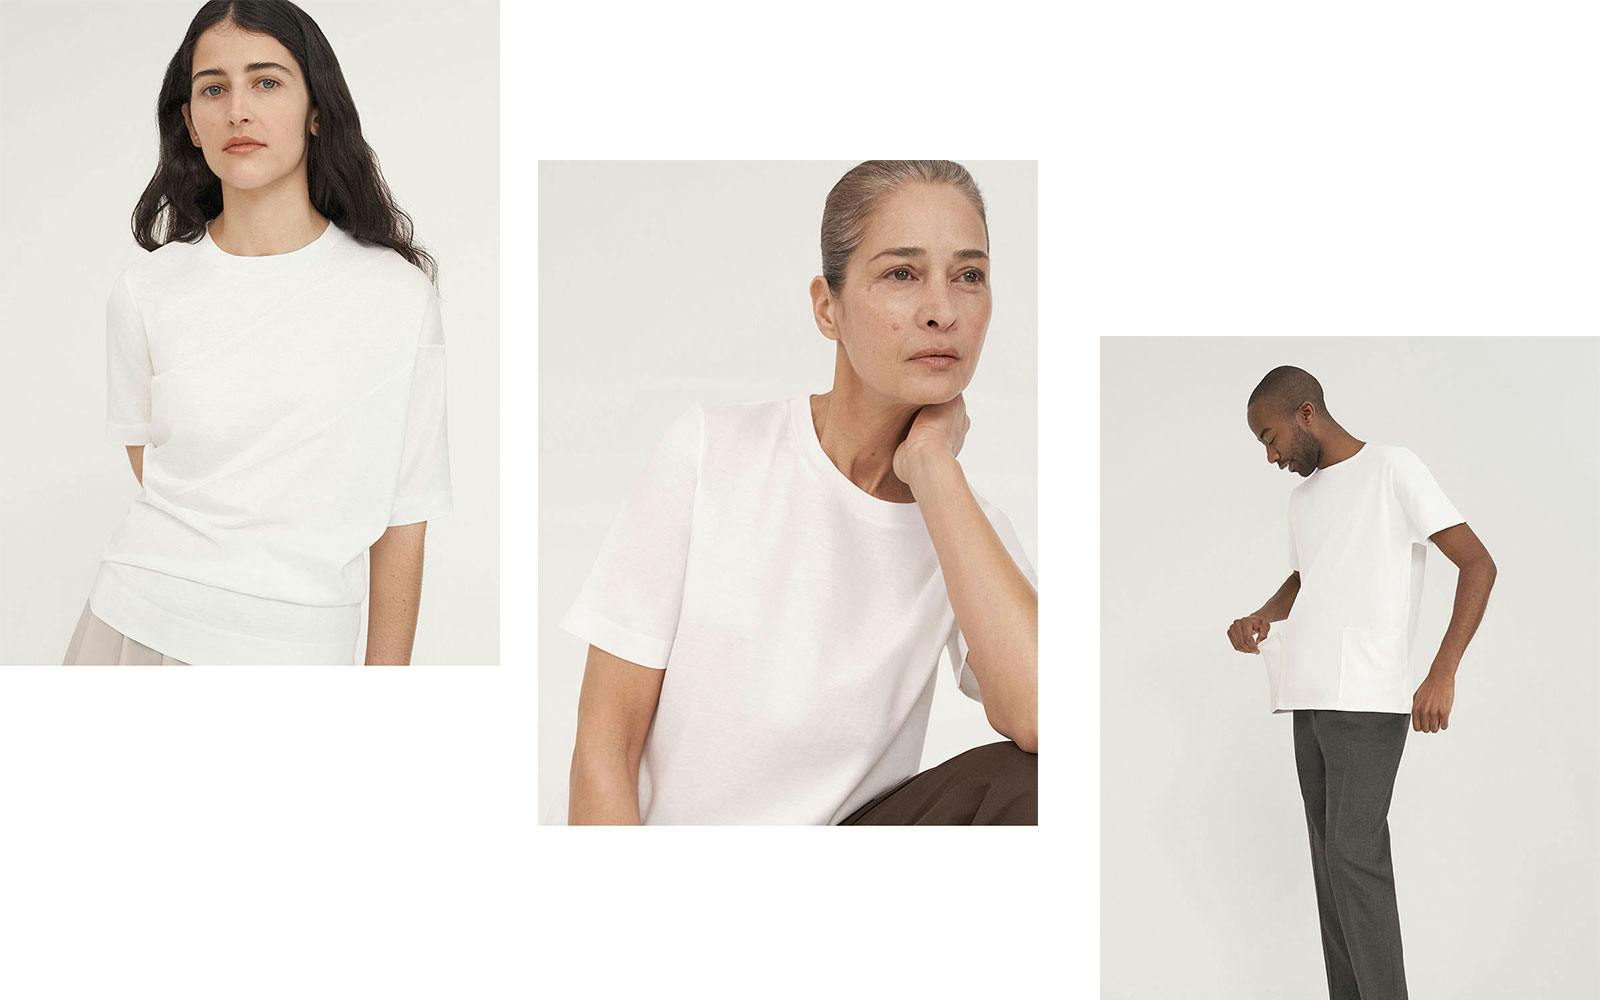 Ever Classic: COS presents The White T-shirt Project